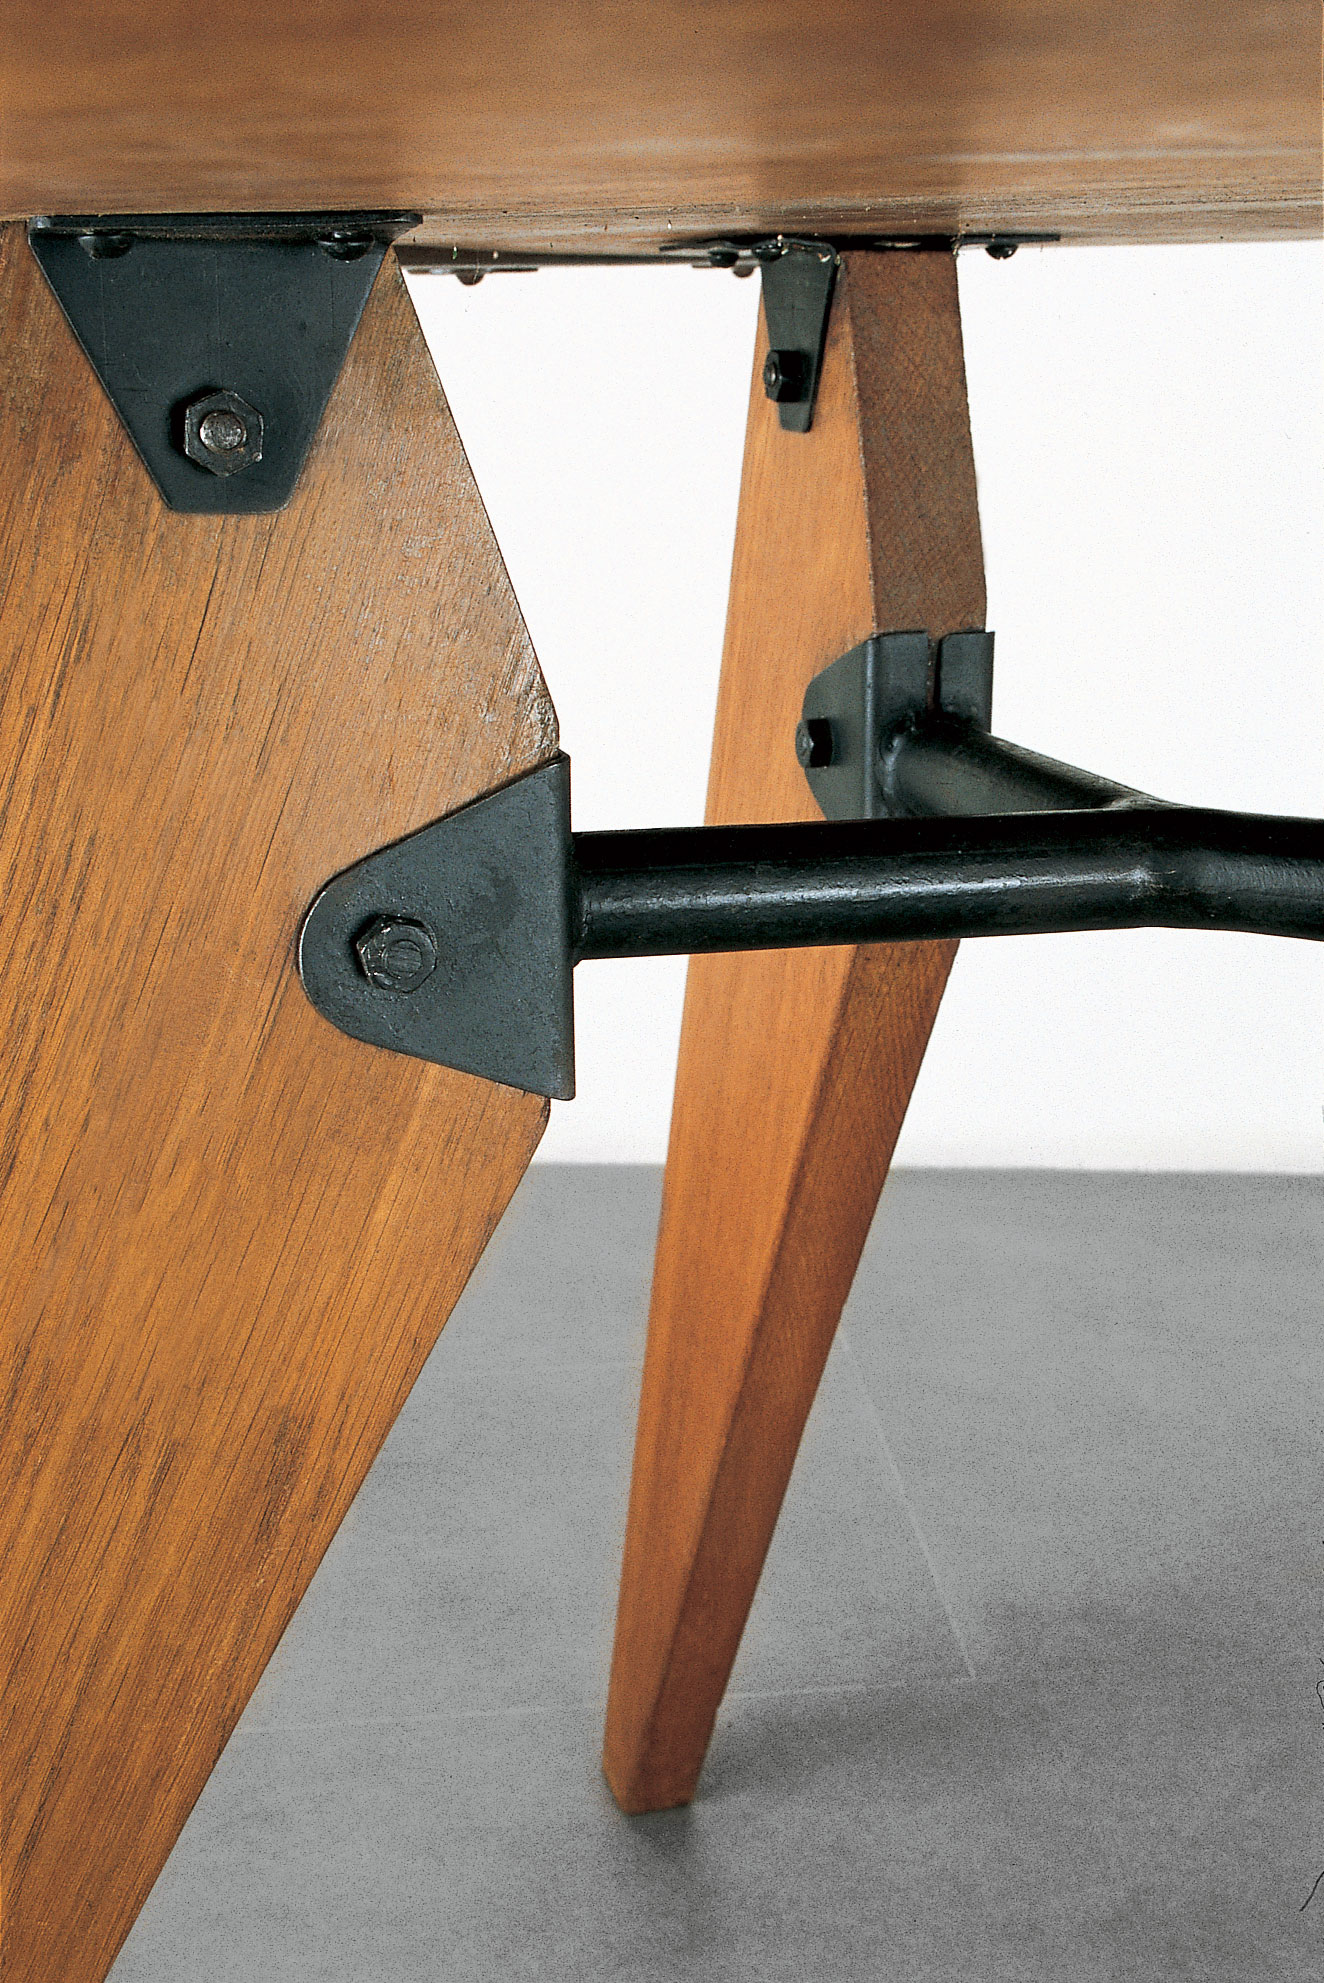 TS 11 table, 1947. Detail showing the fixation of the crossmember to the legs with metal stirrups.